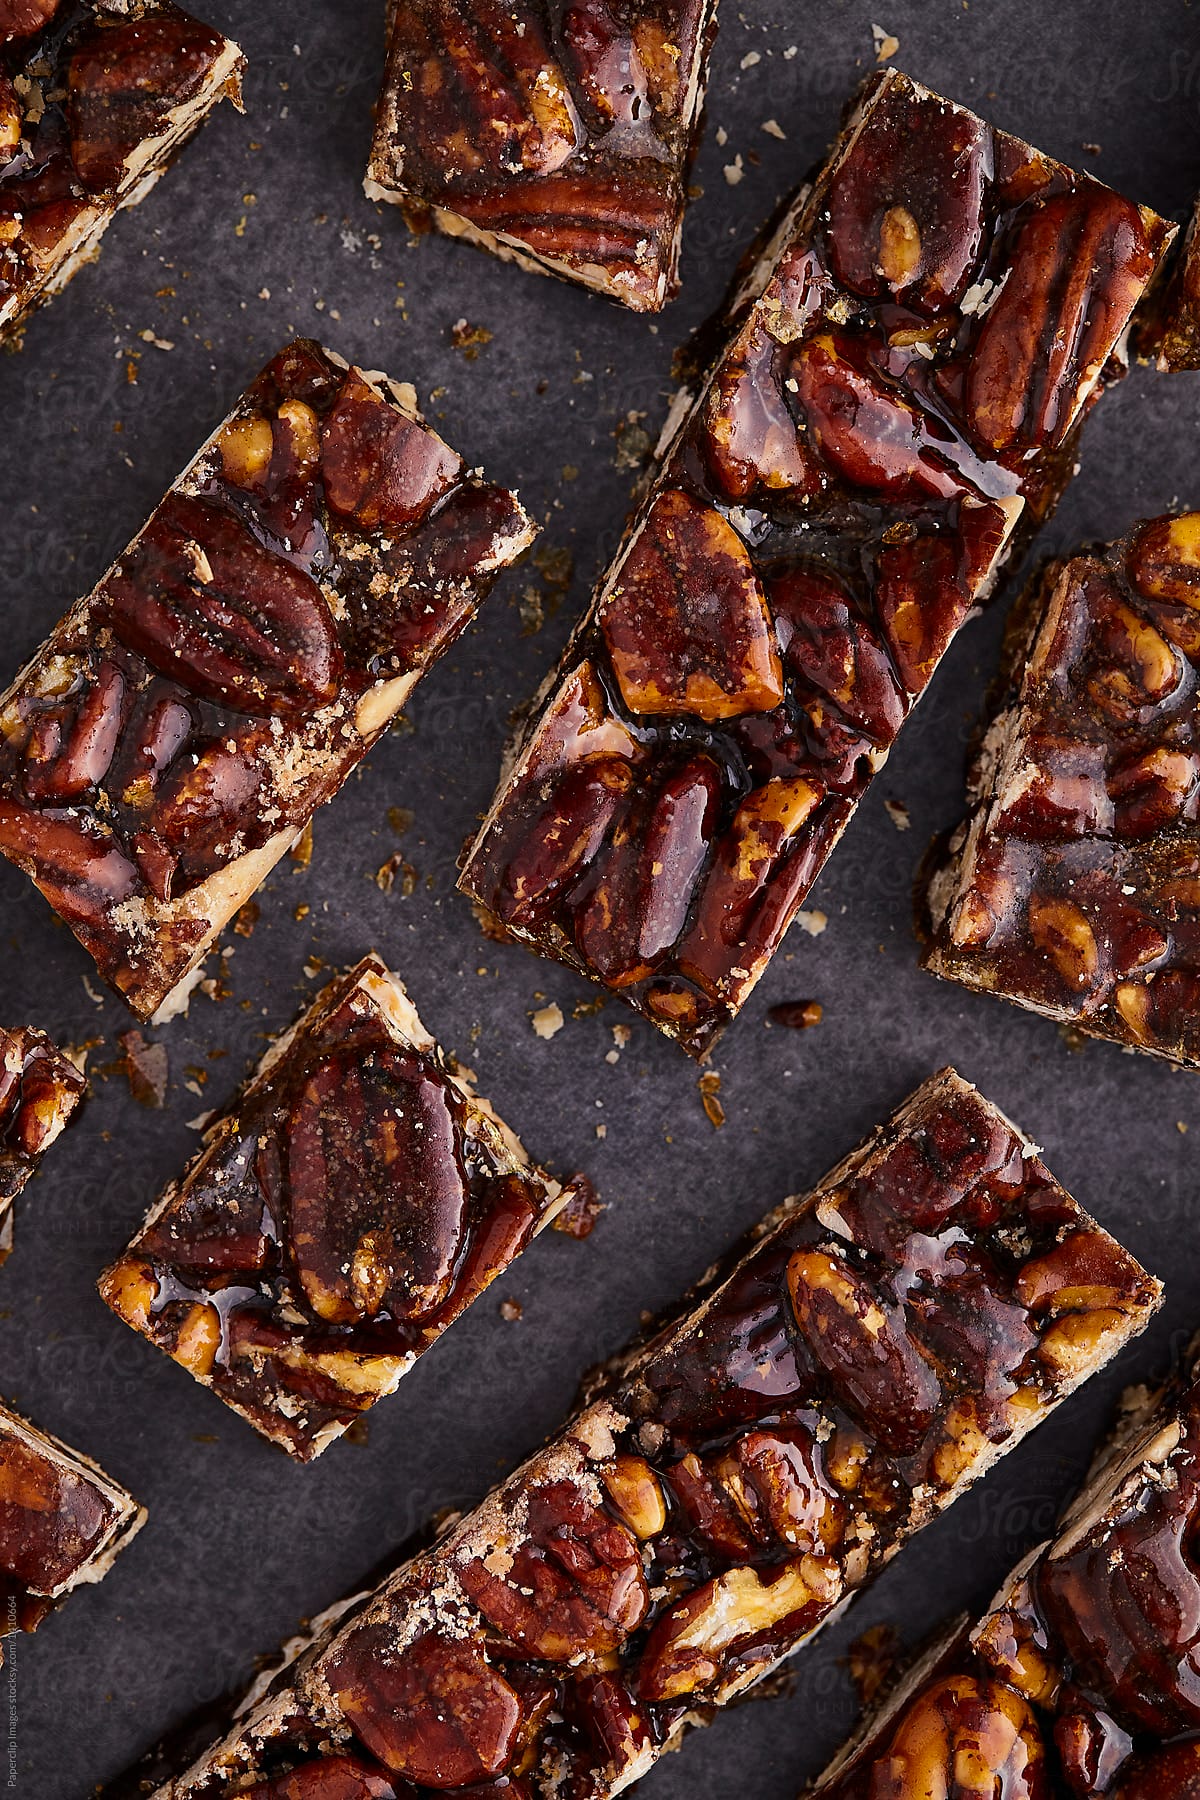 Crocant bars with pecan nuts